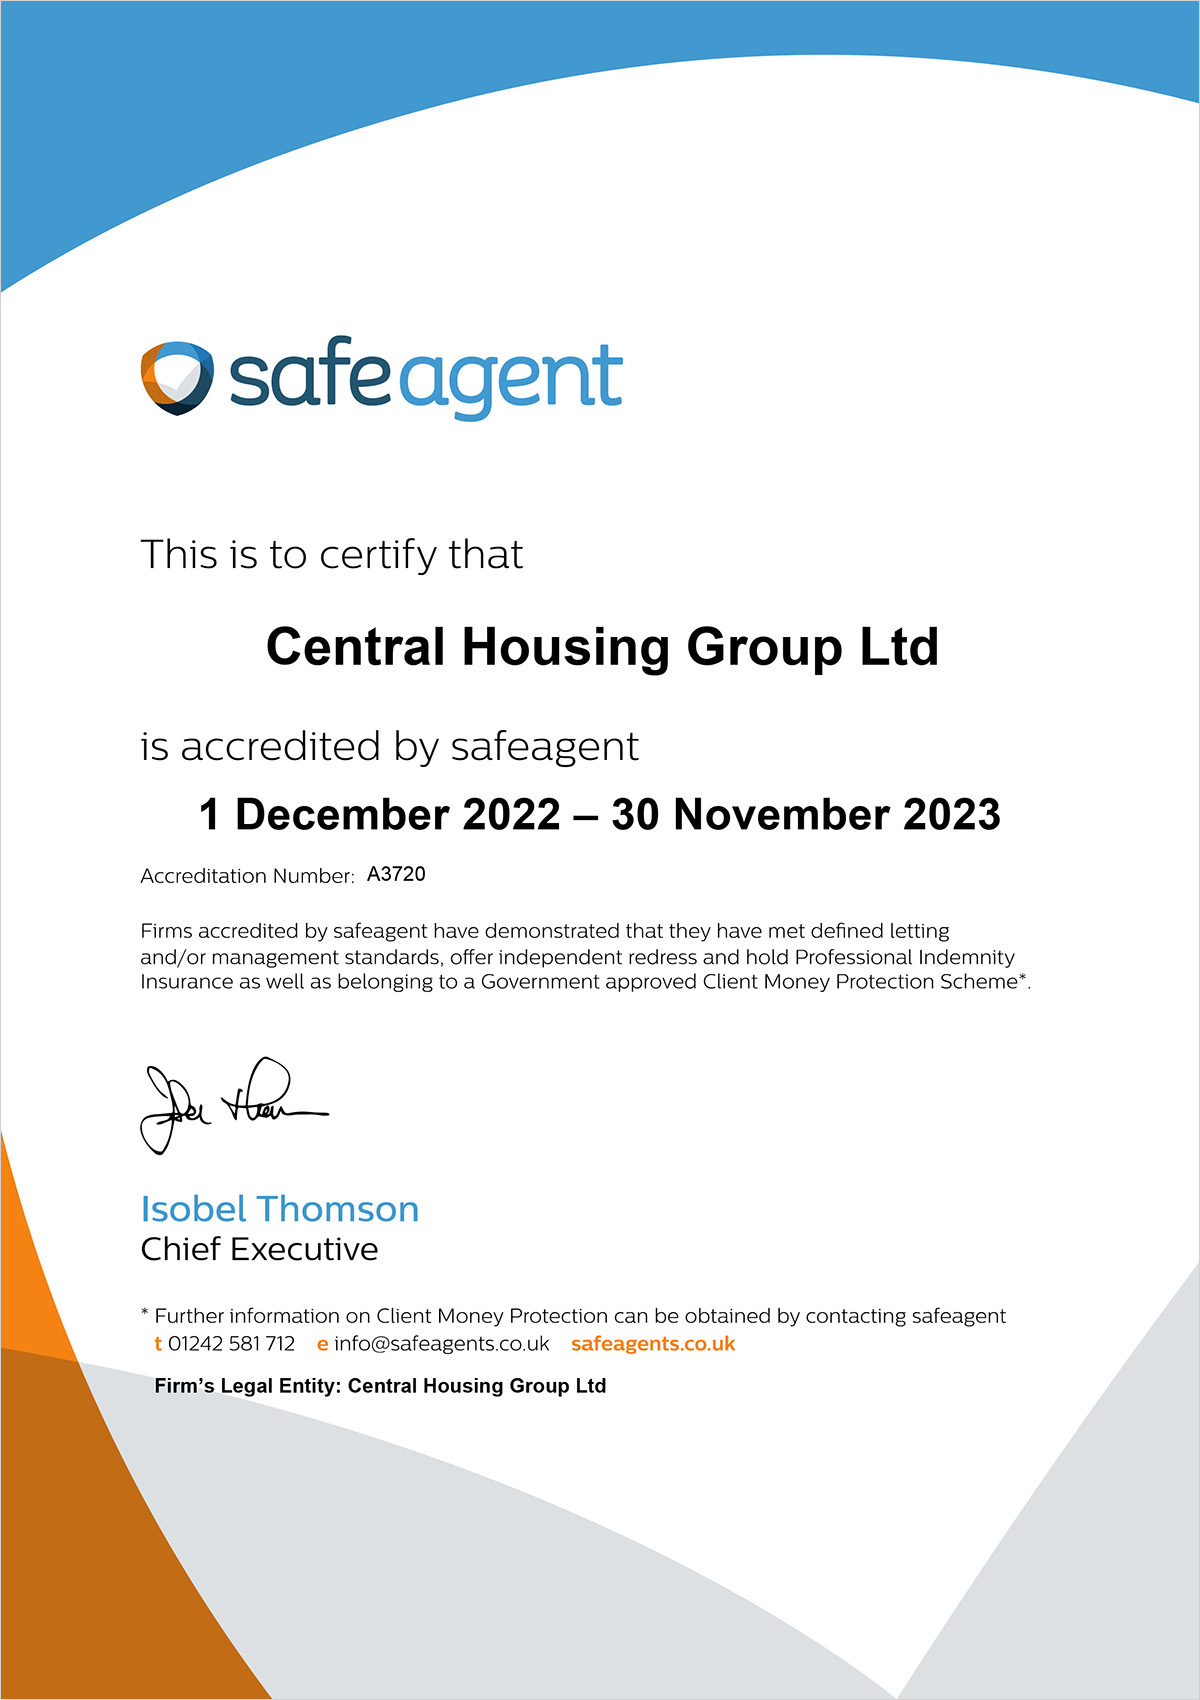 Safe Agent Accreditation Certificate CHG